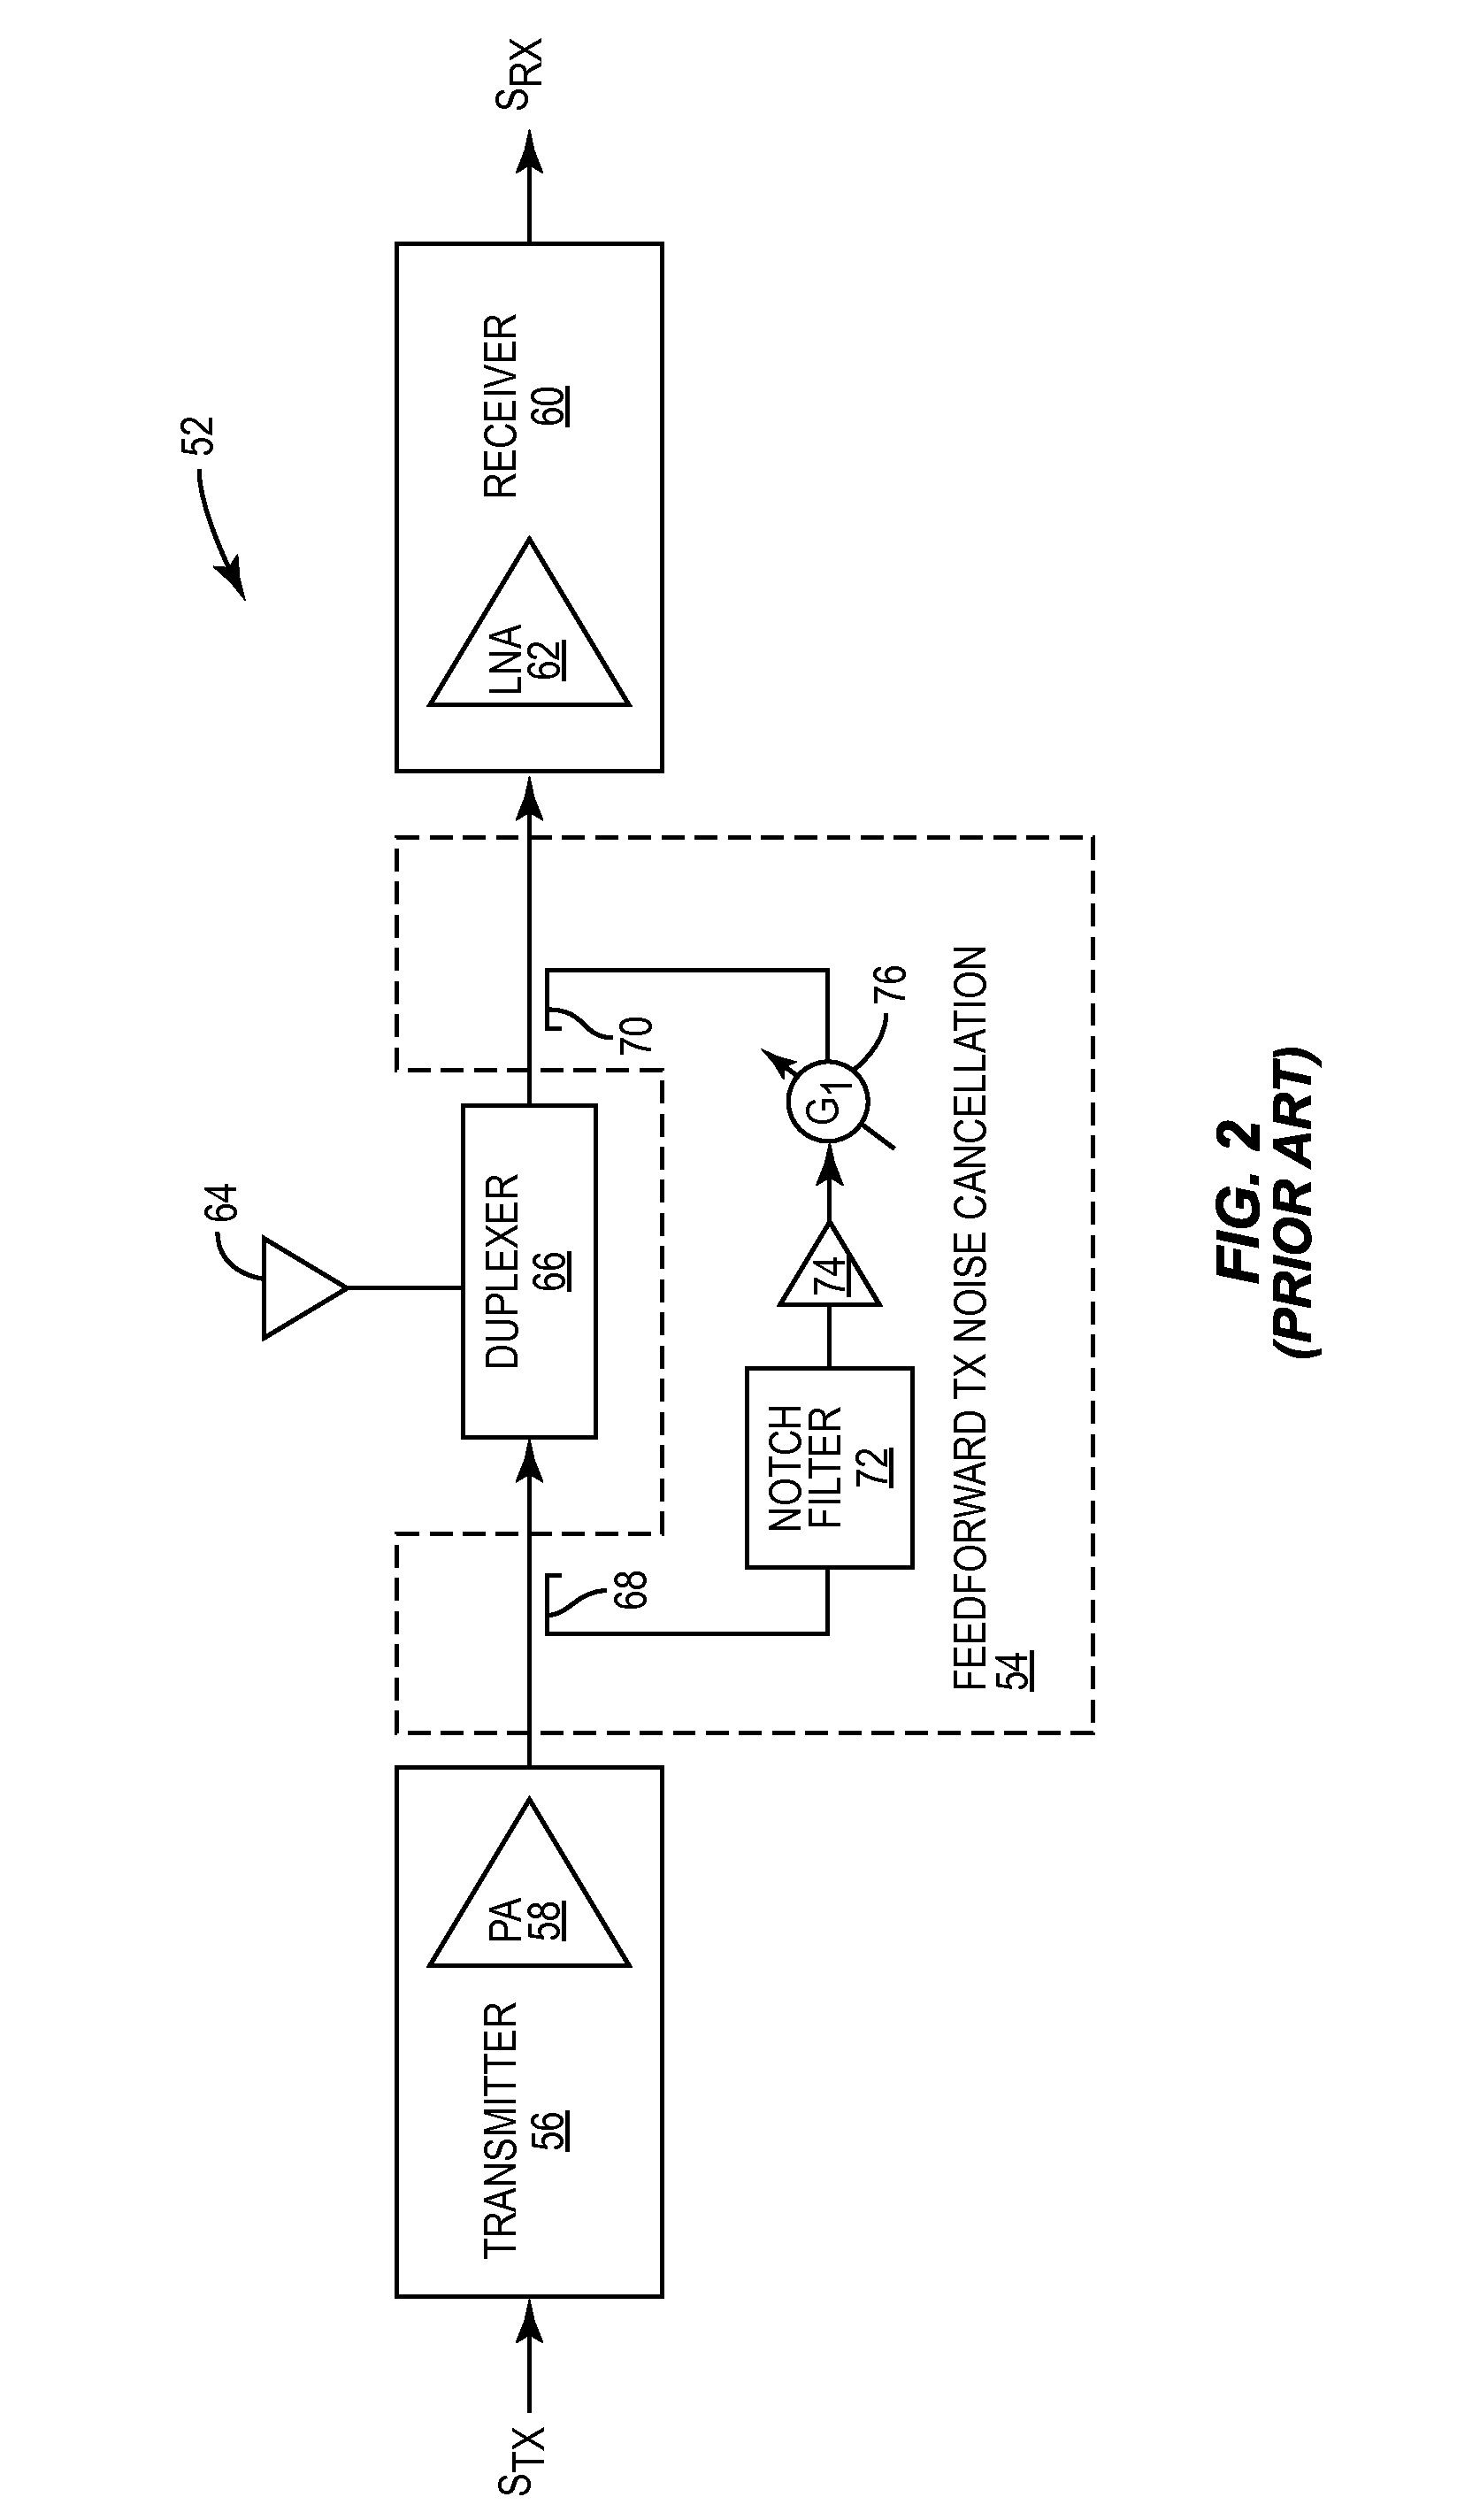 Transmitter noise suppression in receiver